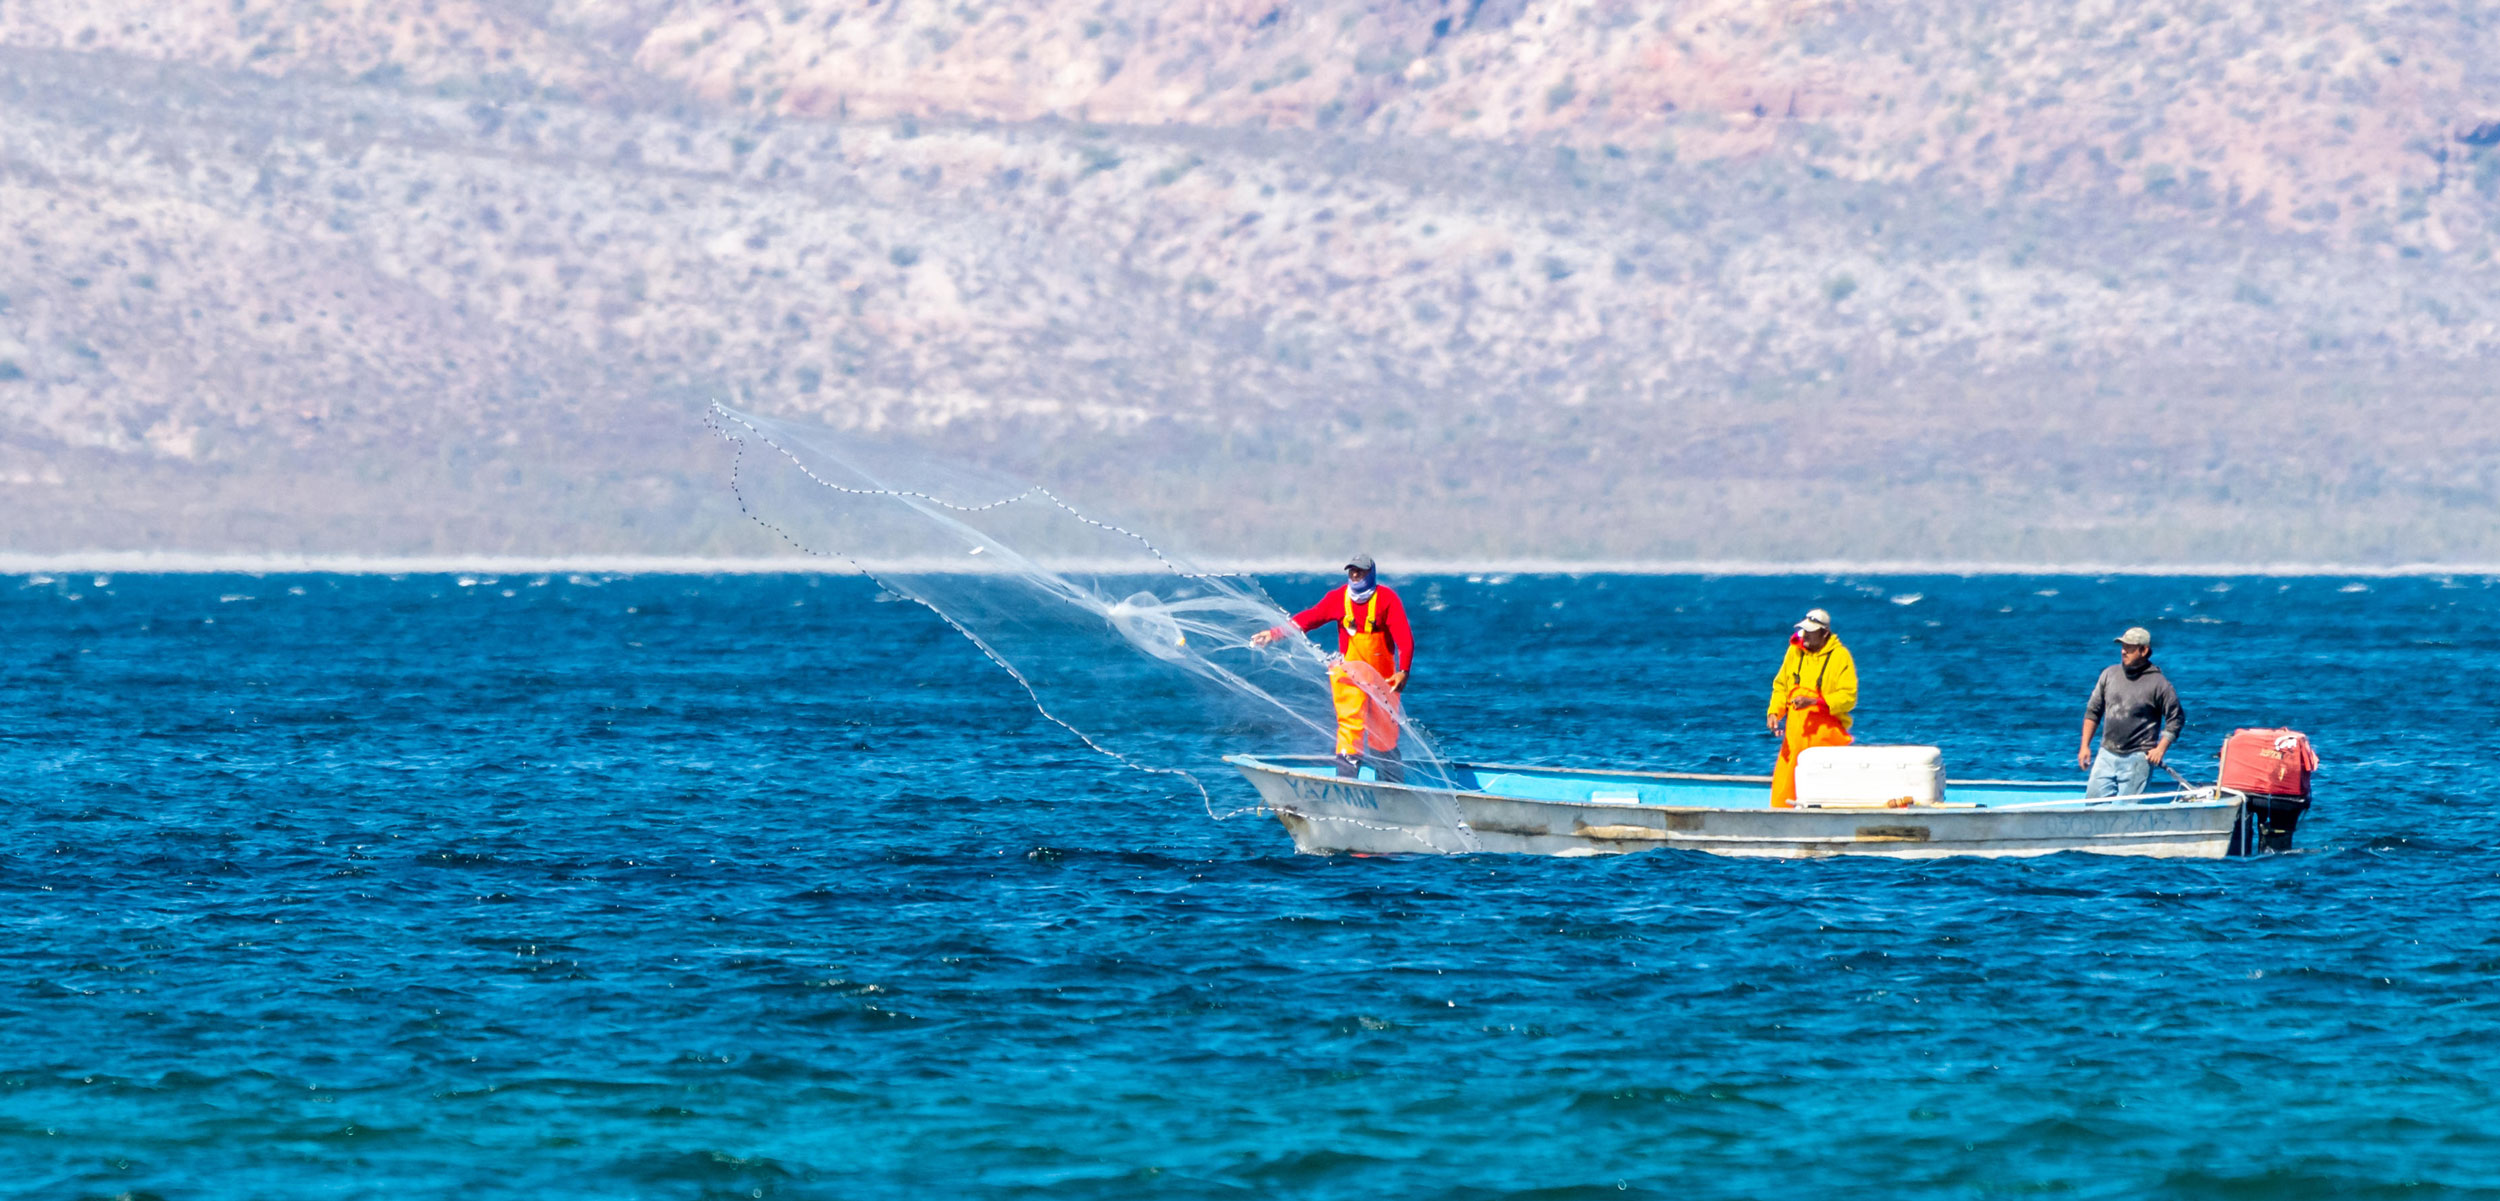 Fishermen in a small boat casting a fishing net in Baja California Sur, Mexico